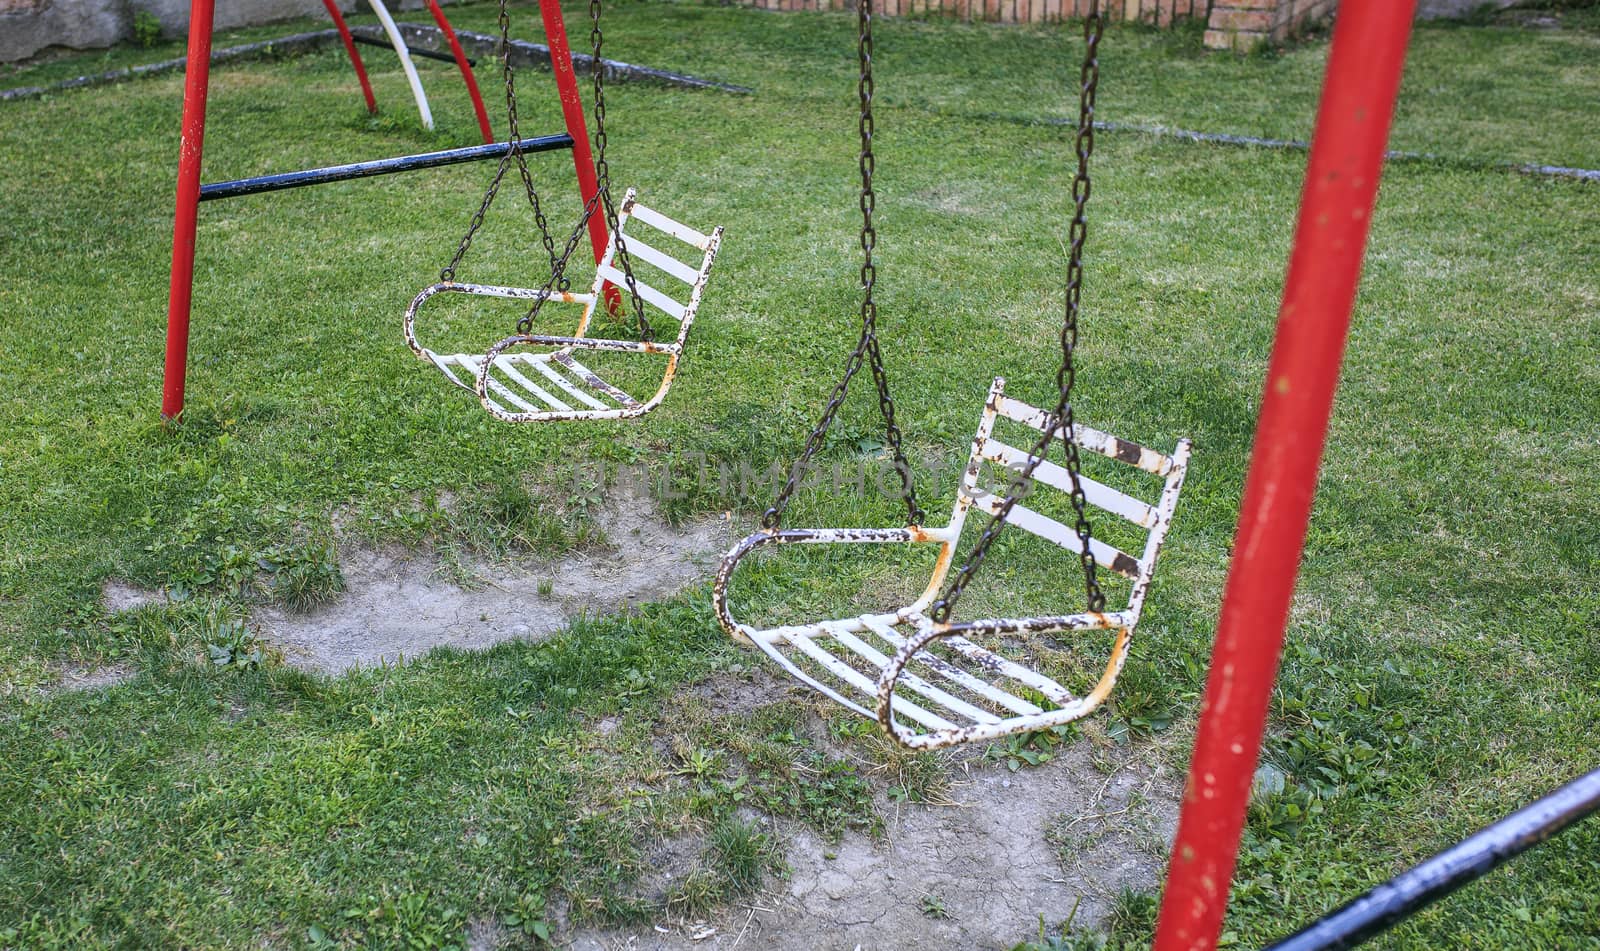 iron swing seat in a park